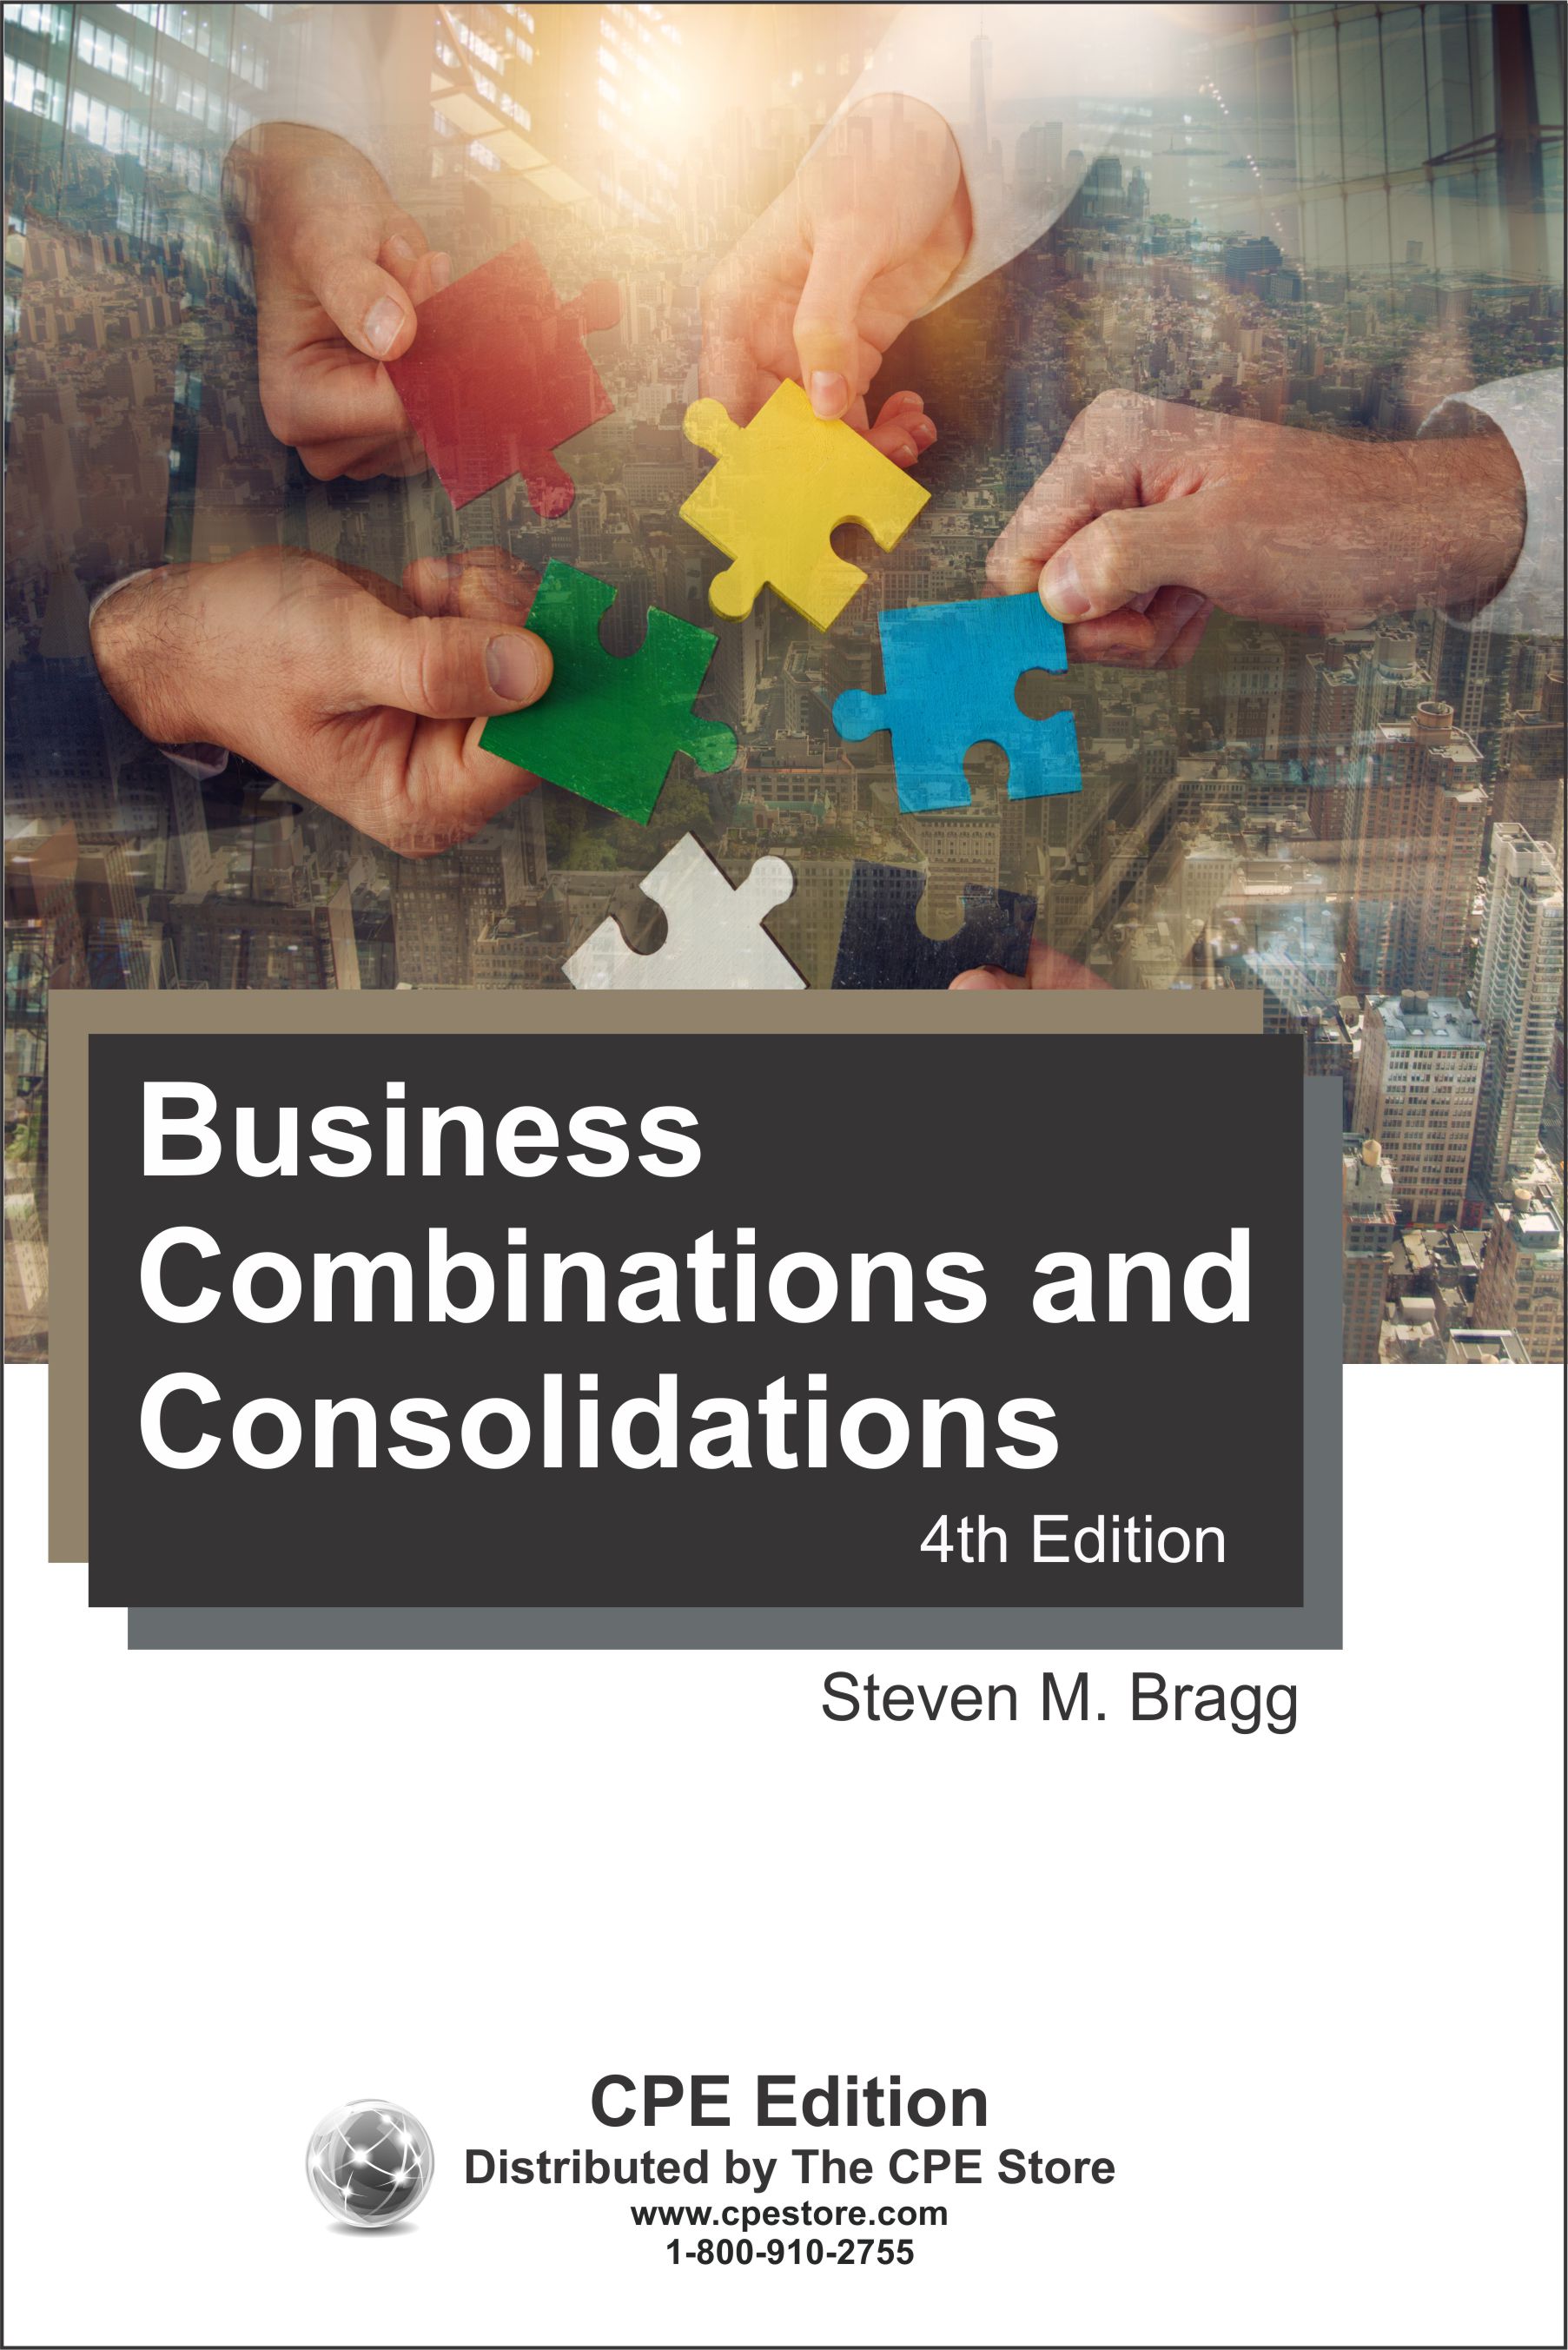 Business Combinations and Consolidations